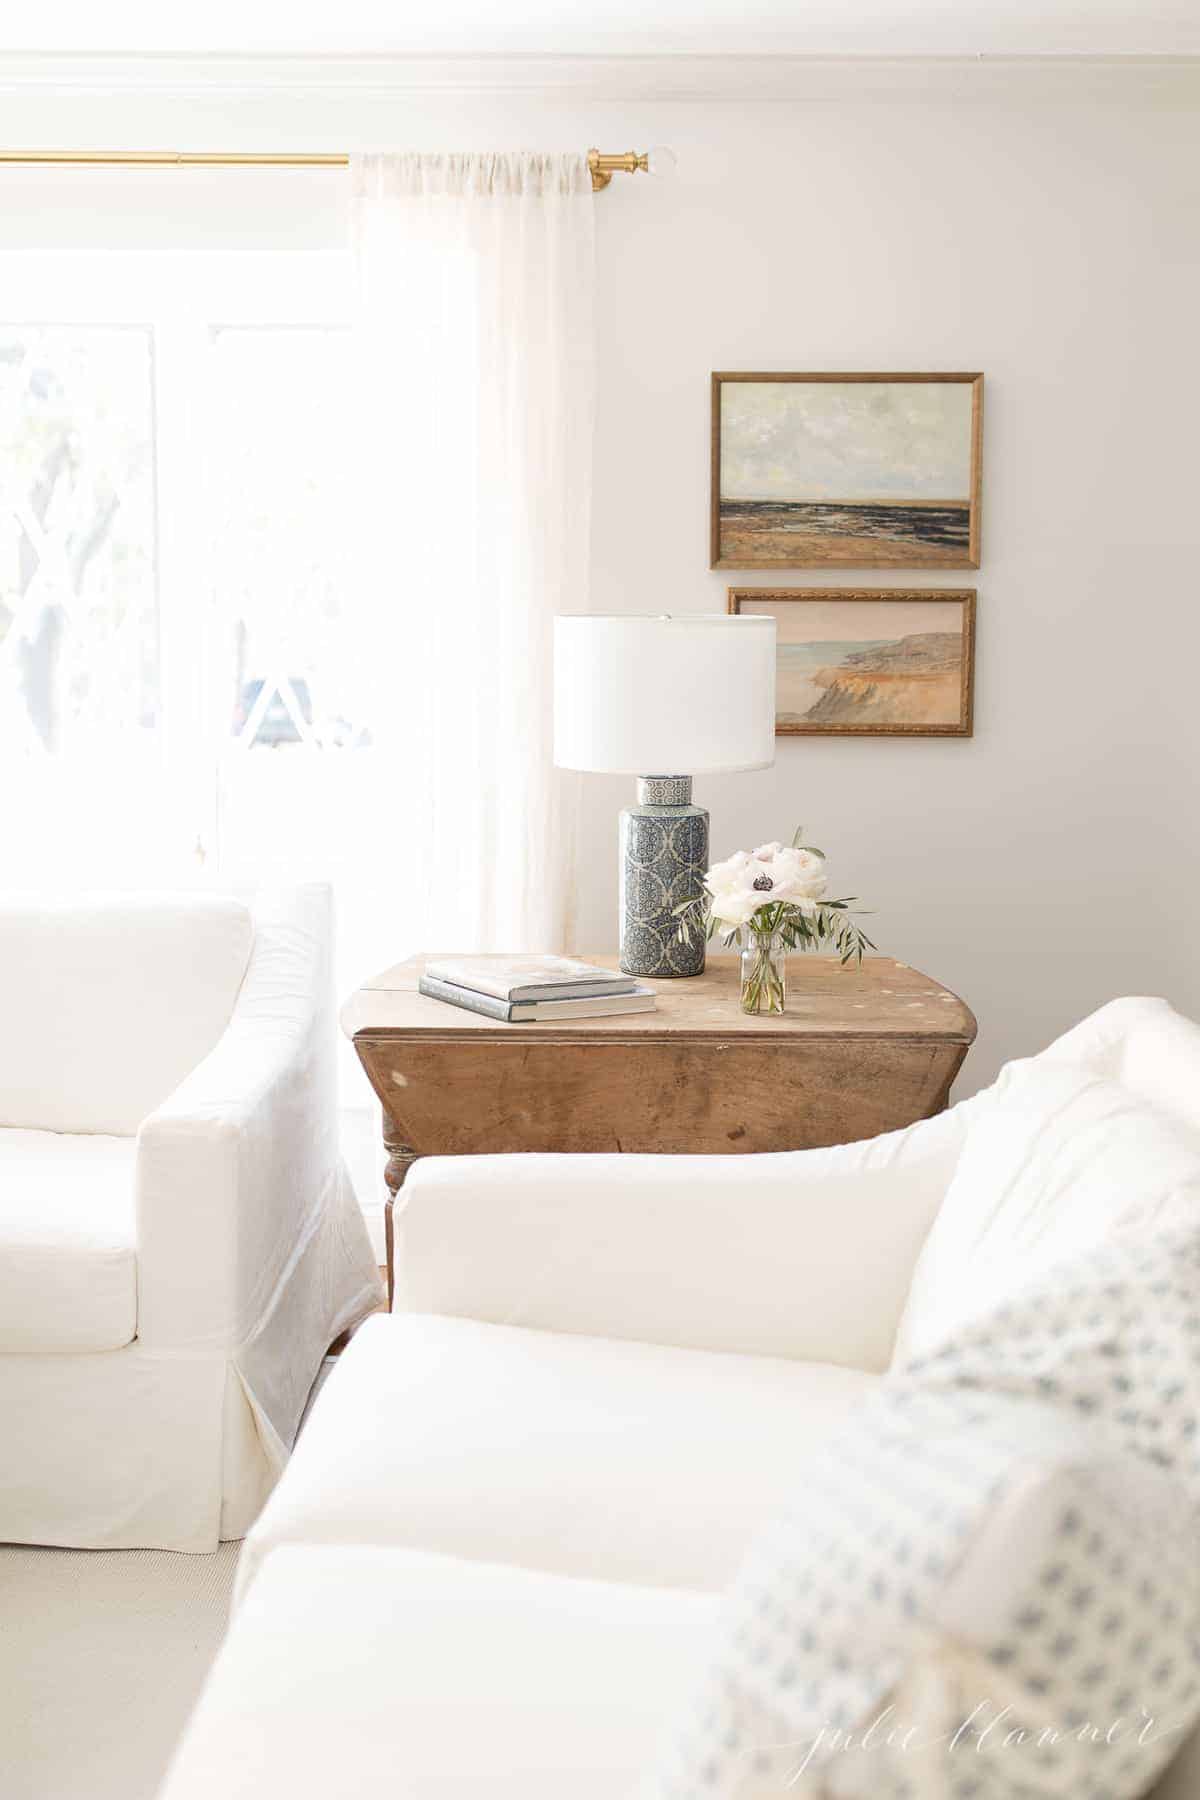 A living room with white furniture with a cream eggshell paint on the walls.